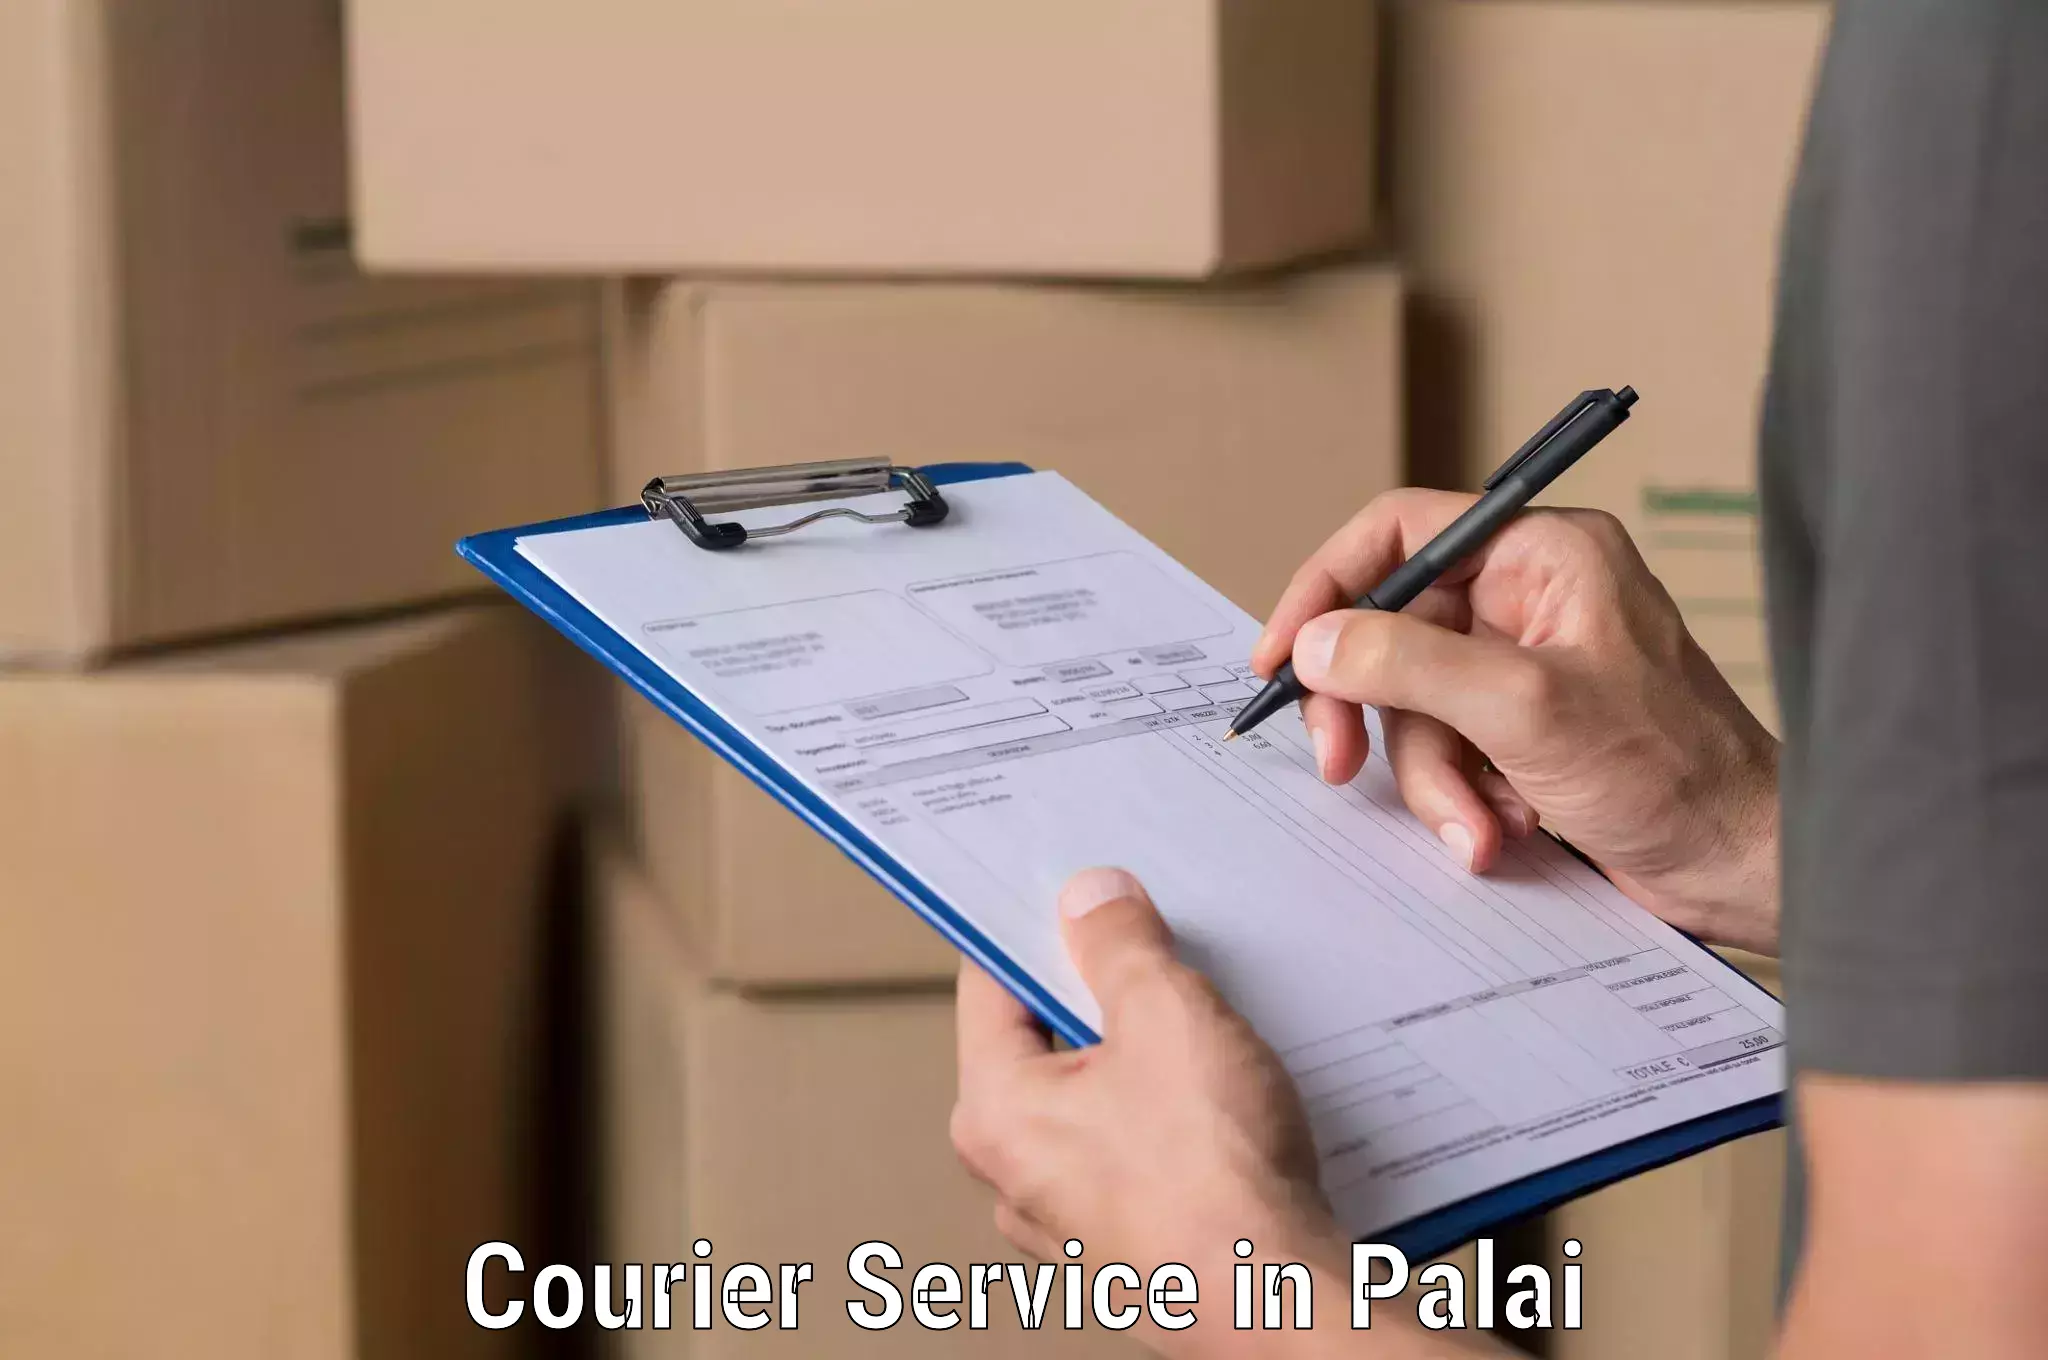 Overnight delivery services in Palai